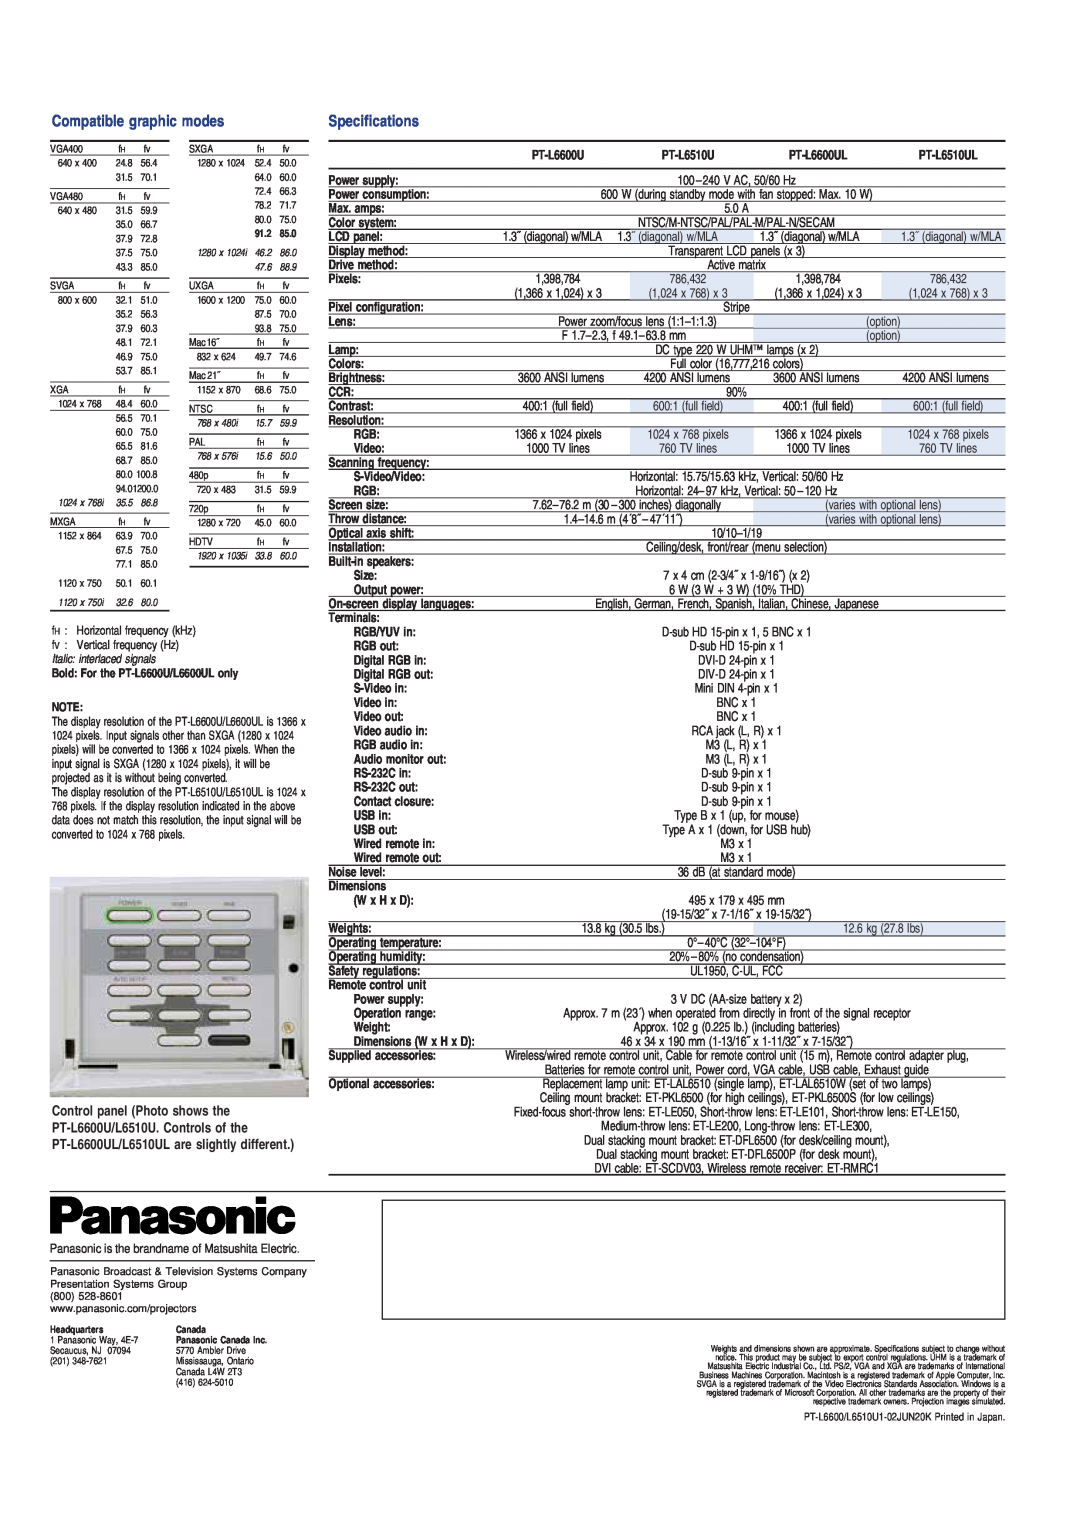 Panasonic PT-L6510UL Compatible graphic modes, Power supply, Power consumption, Max. amps, Color system, LCD panel, Pixels 